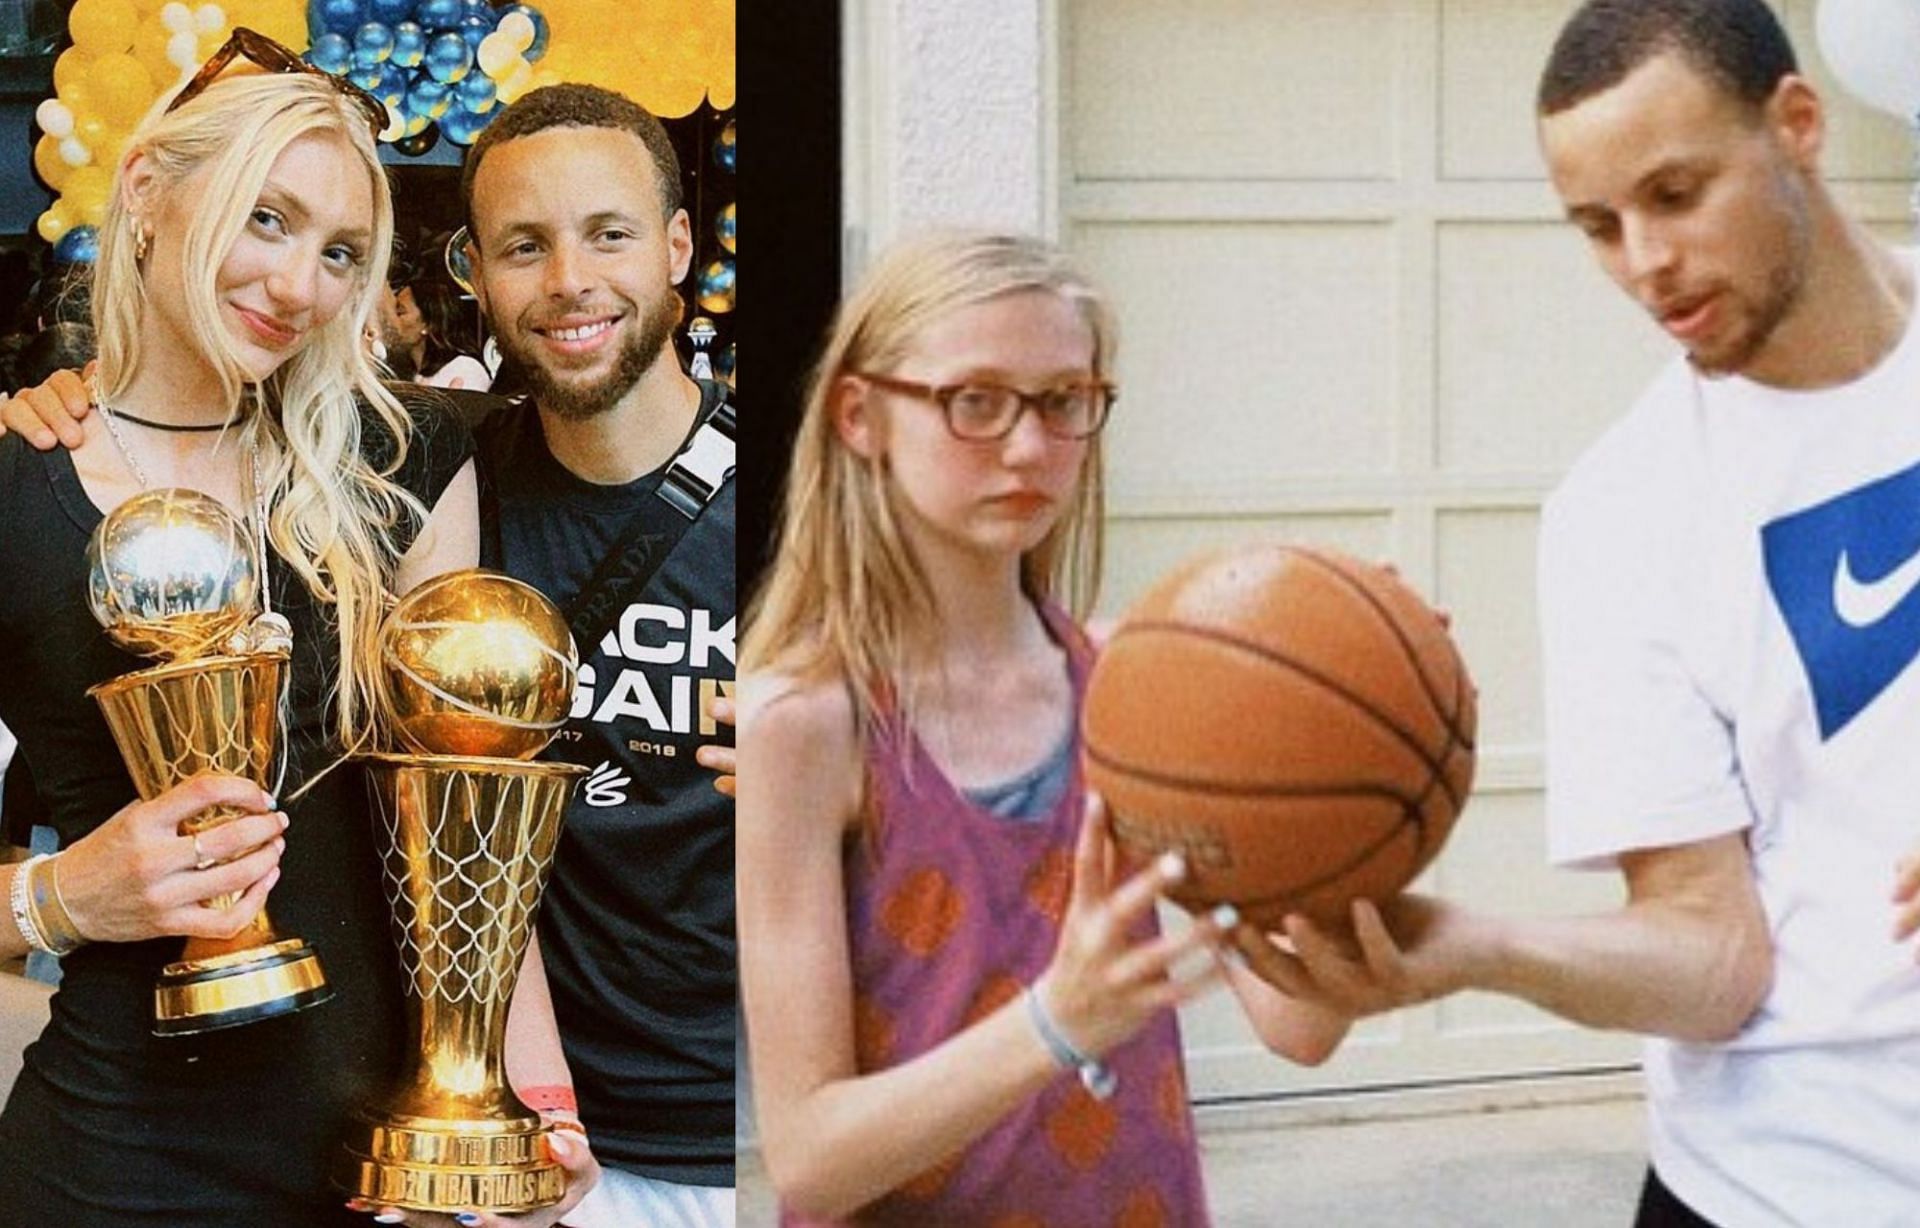 Cameron Brink shares stories growing up with godbrother Steph Curry